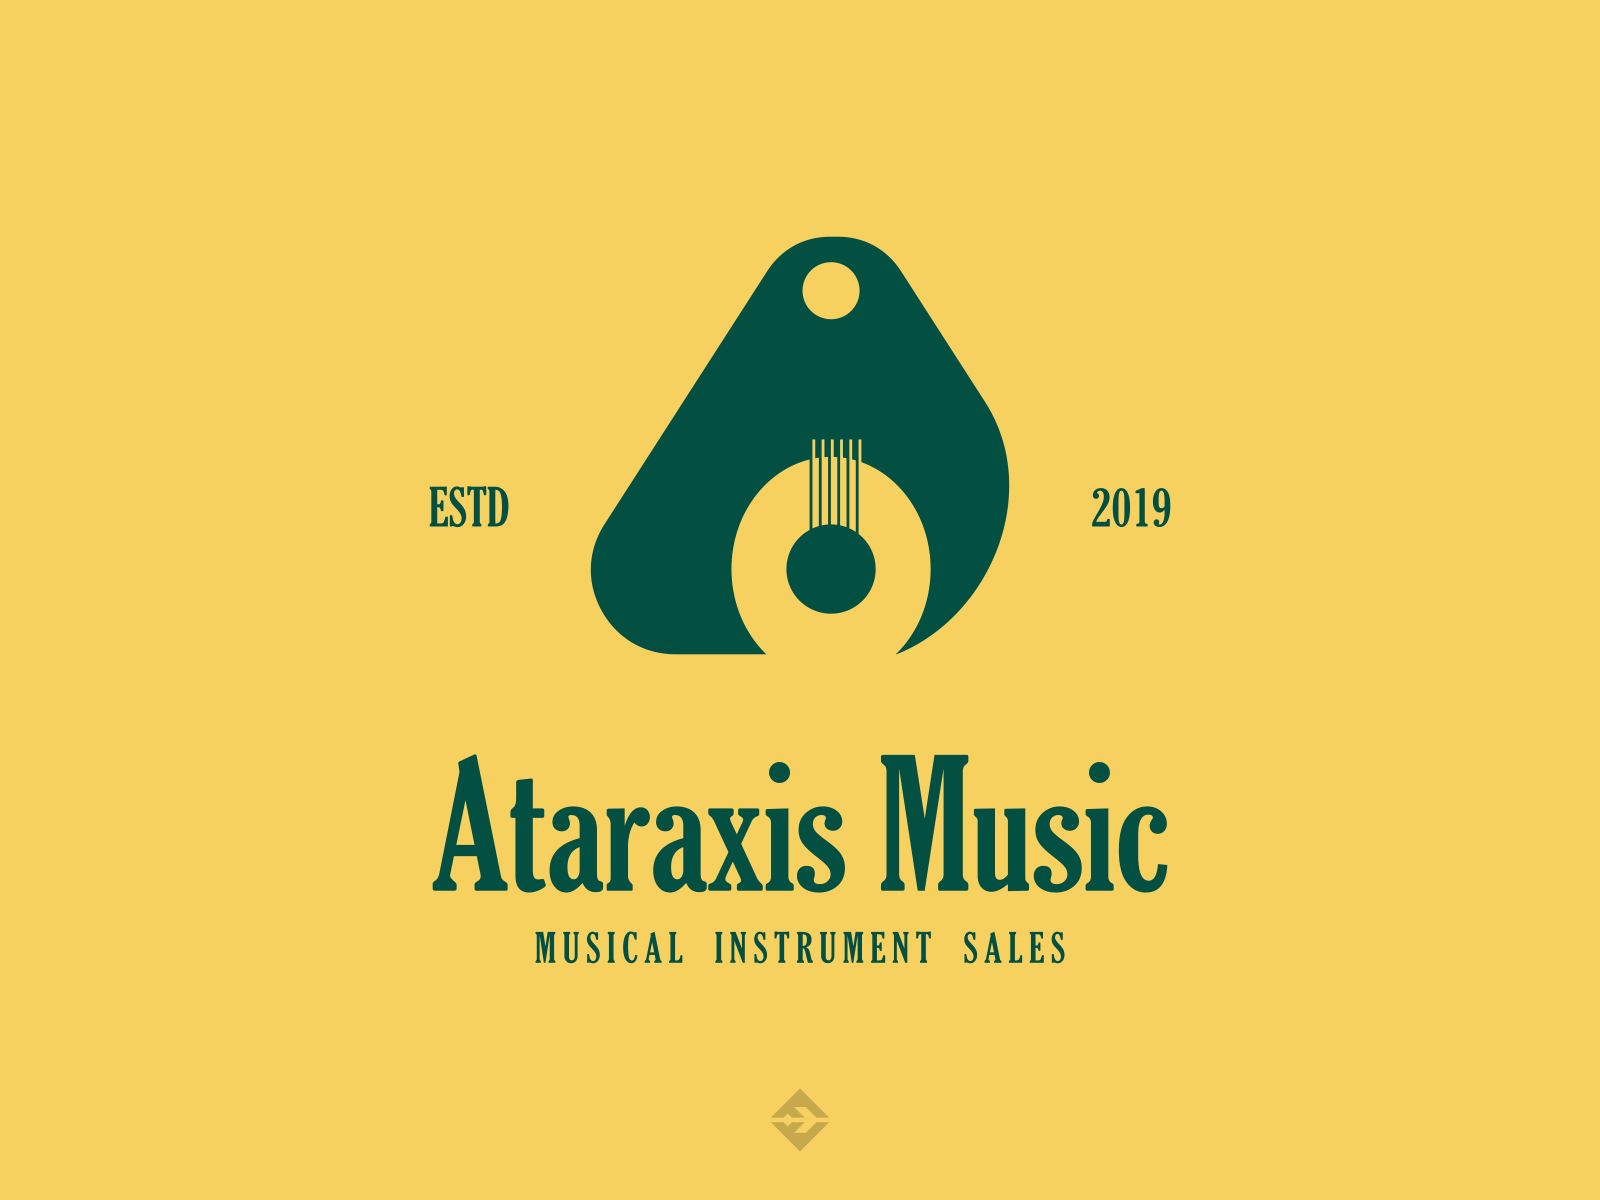 Ataraxis Music - Musical Instrument by Faazadesigns on Dribbble